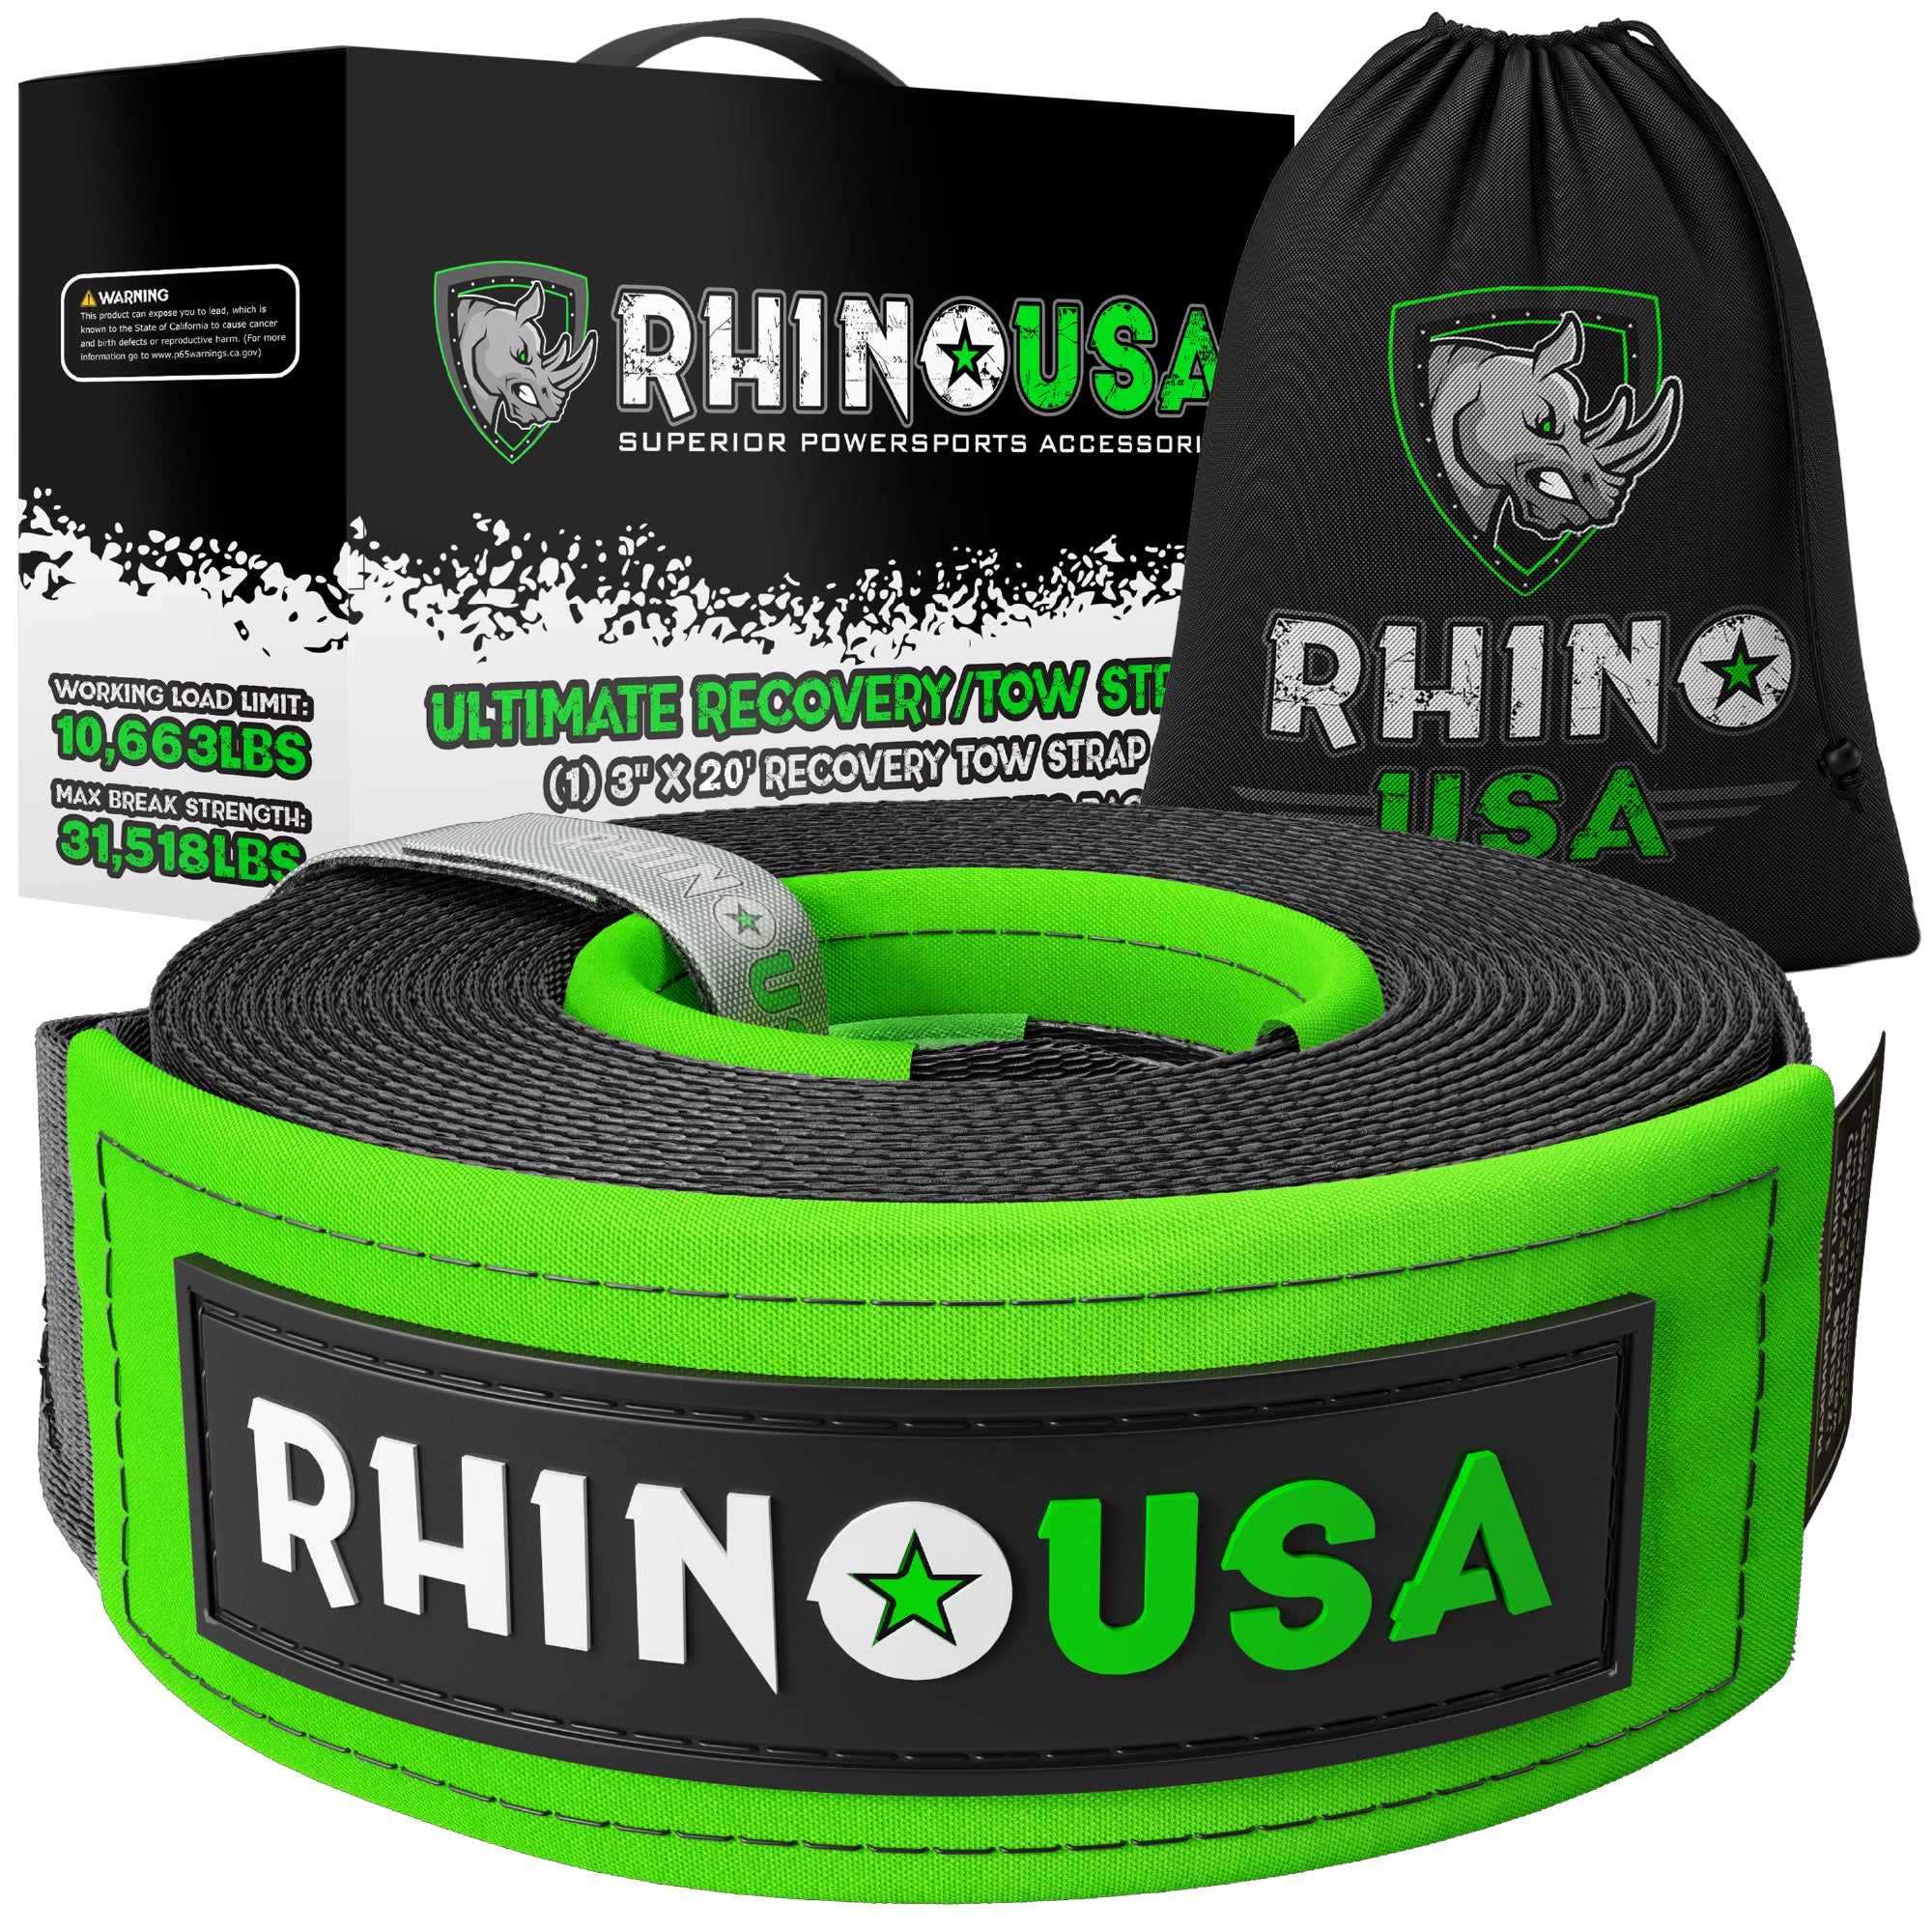 How To Connect a Tow Strap to D-Ring Shackles – Rhino USA